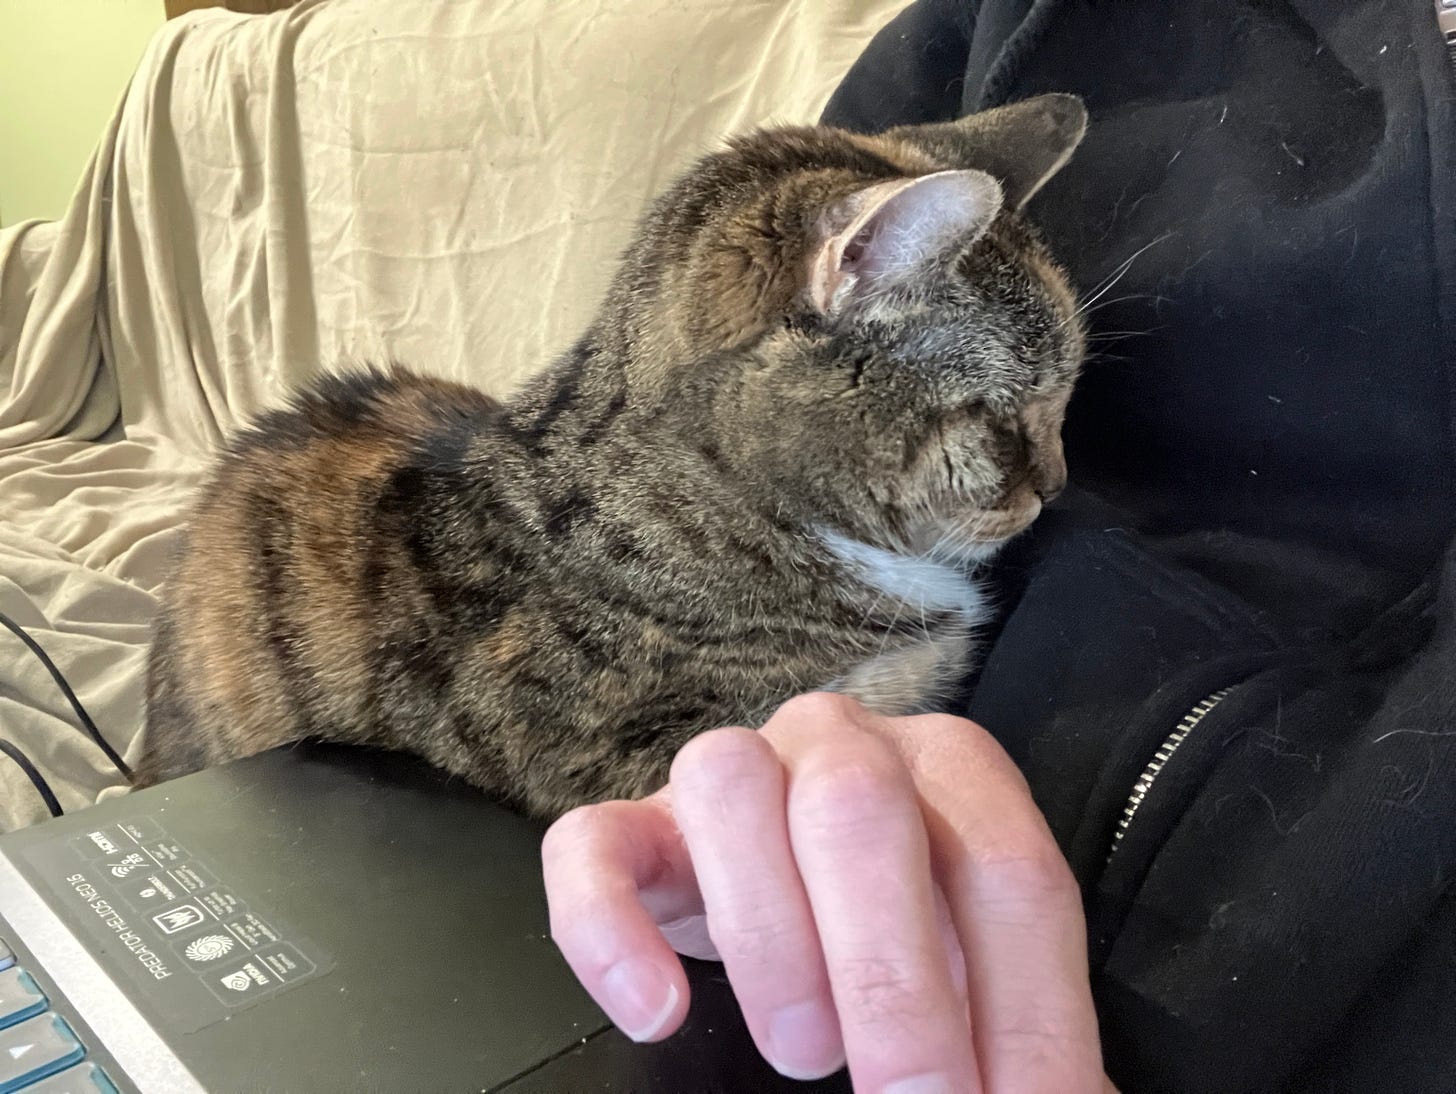 Cat in loaf position on top of her human's arm and laptop